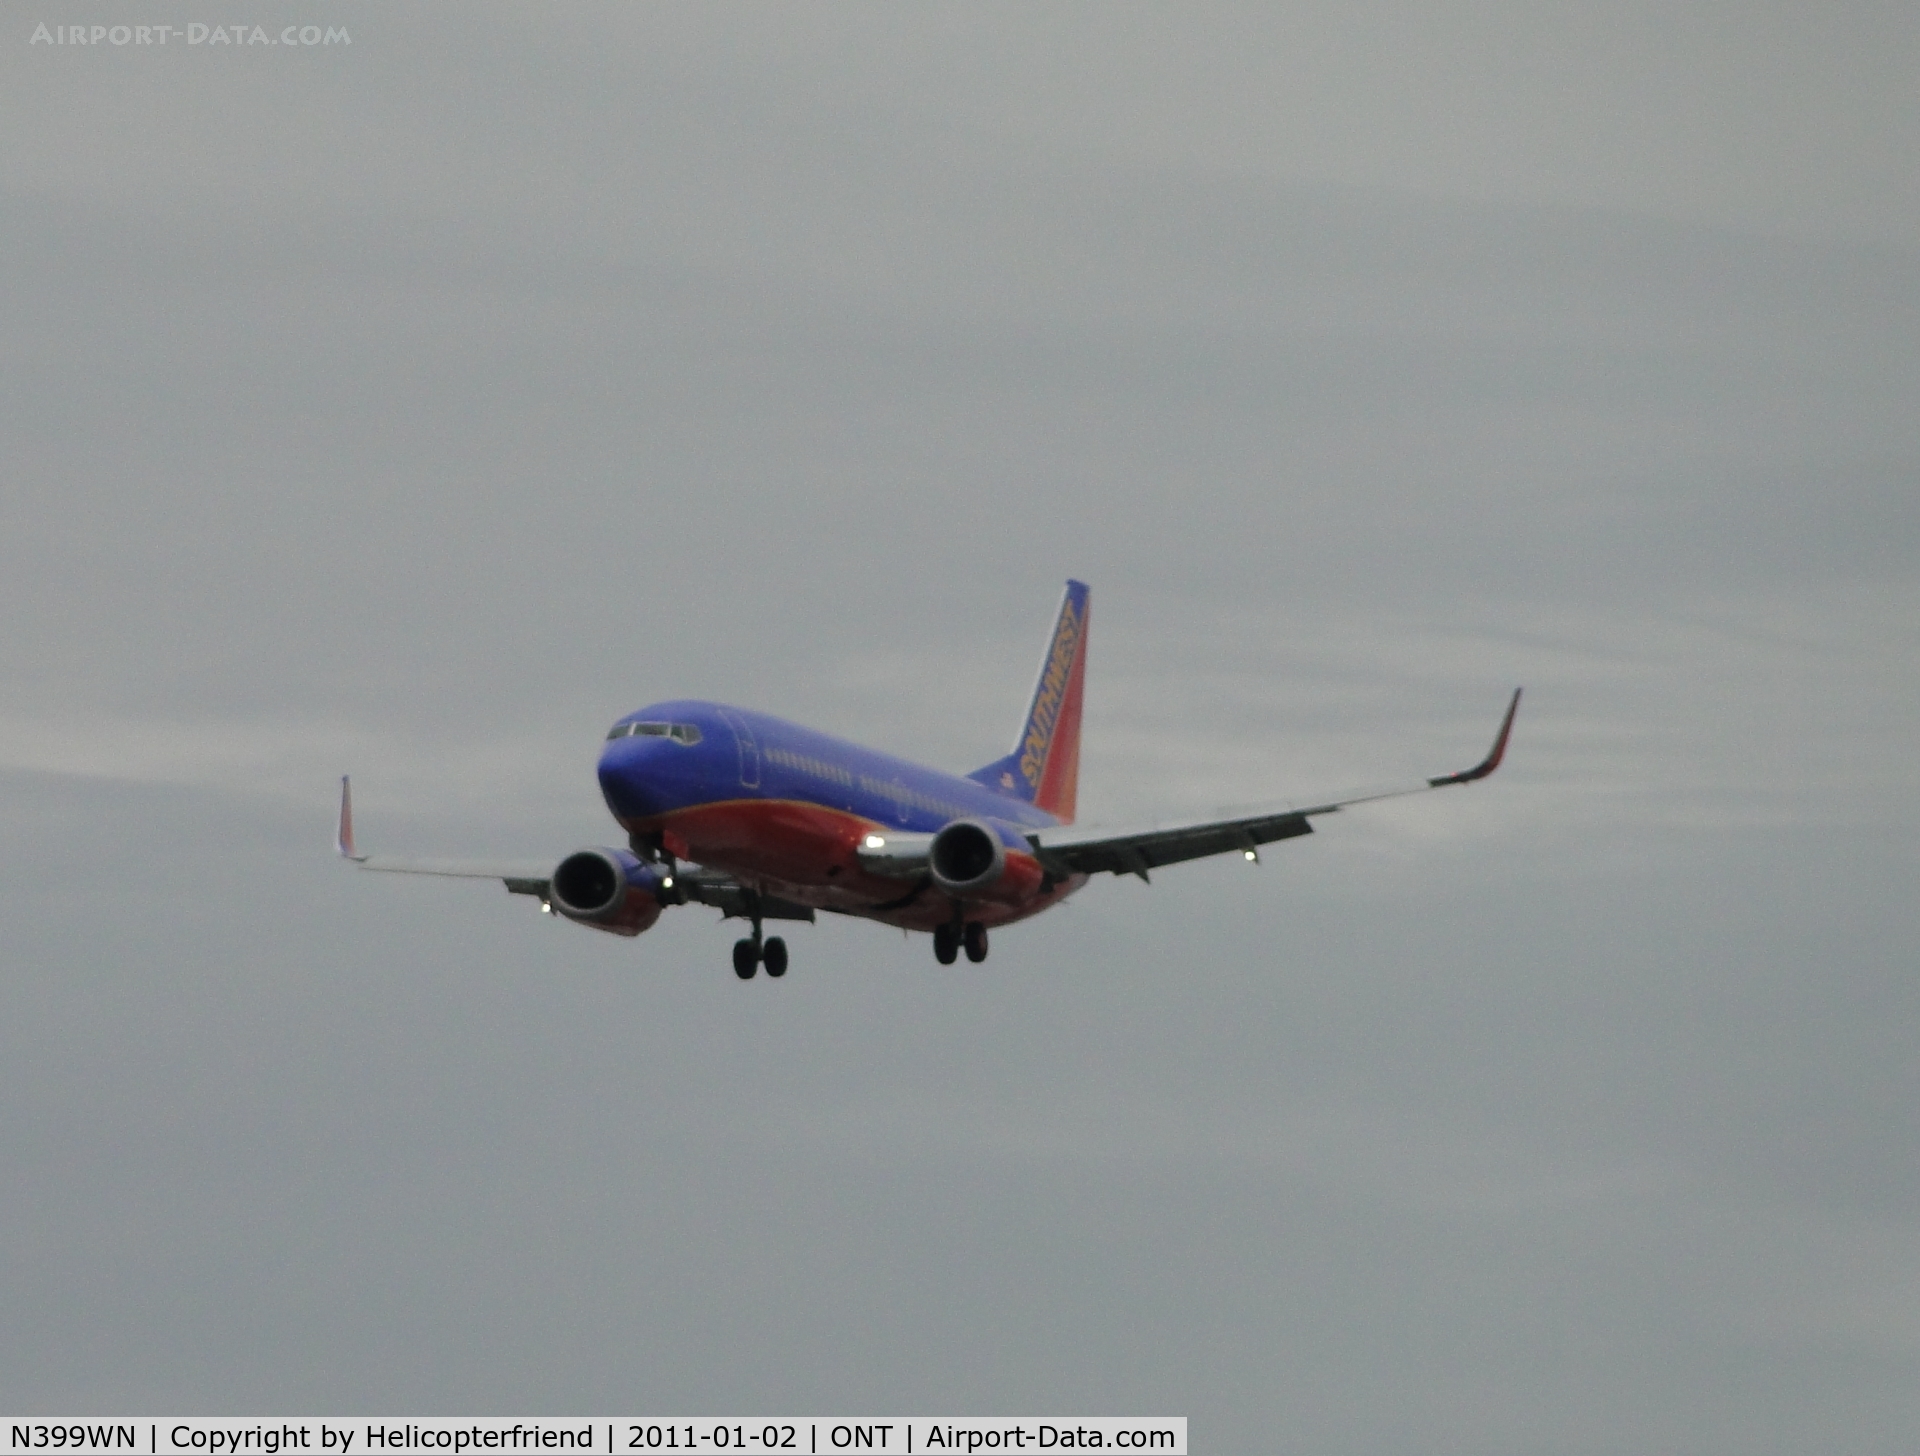 N399WN, 1995 Boeing 737-3H4 C/N 27693, All lights on and on final to runway 26R on a cold drizzly day